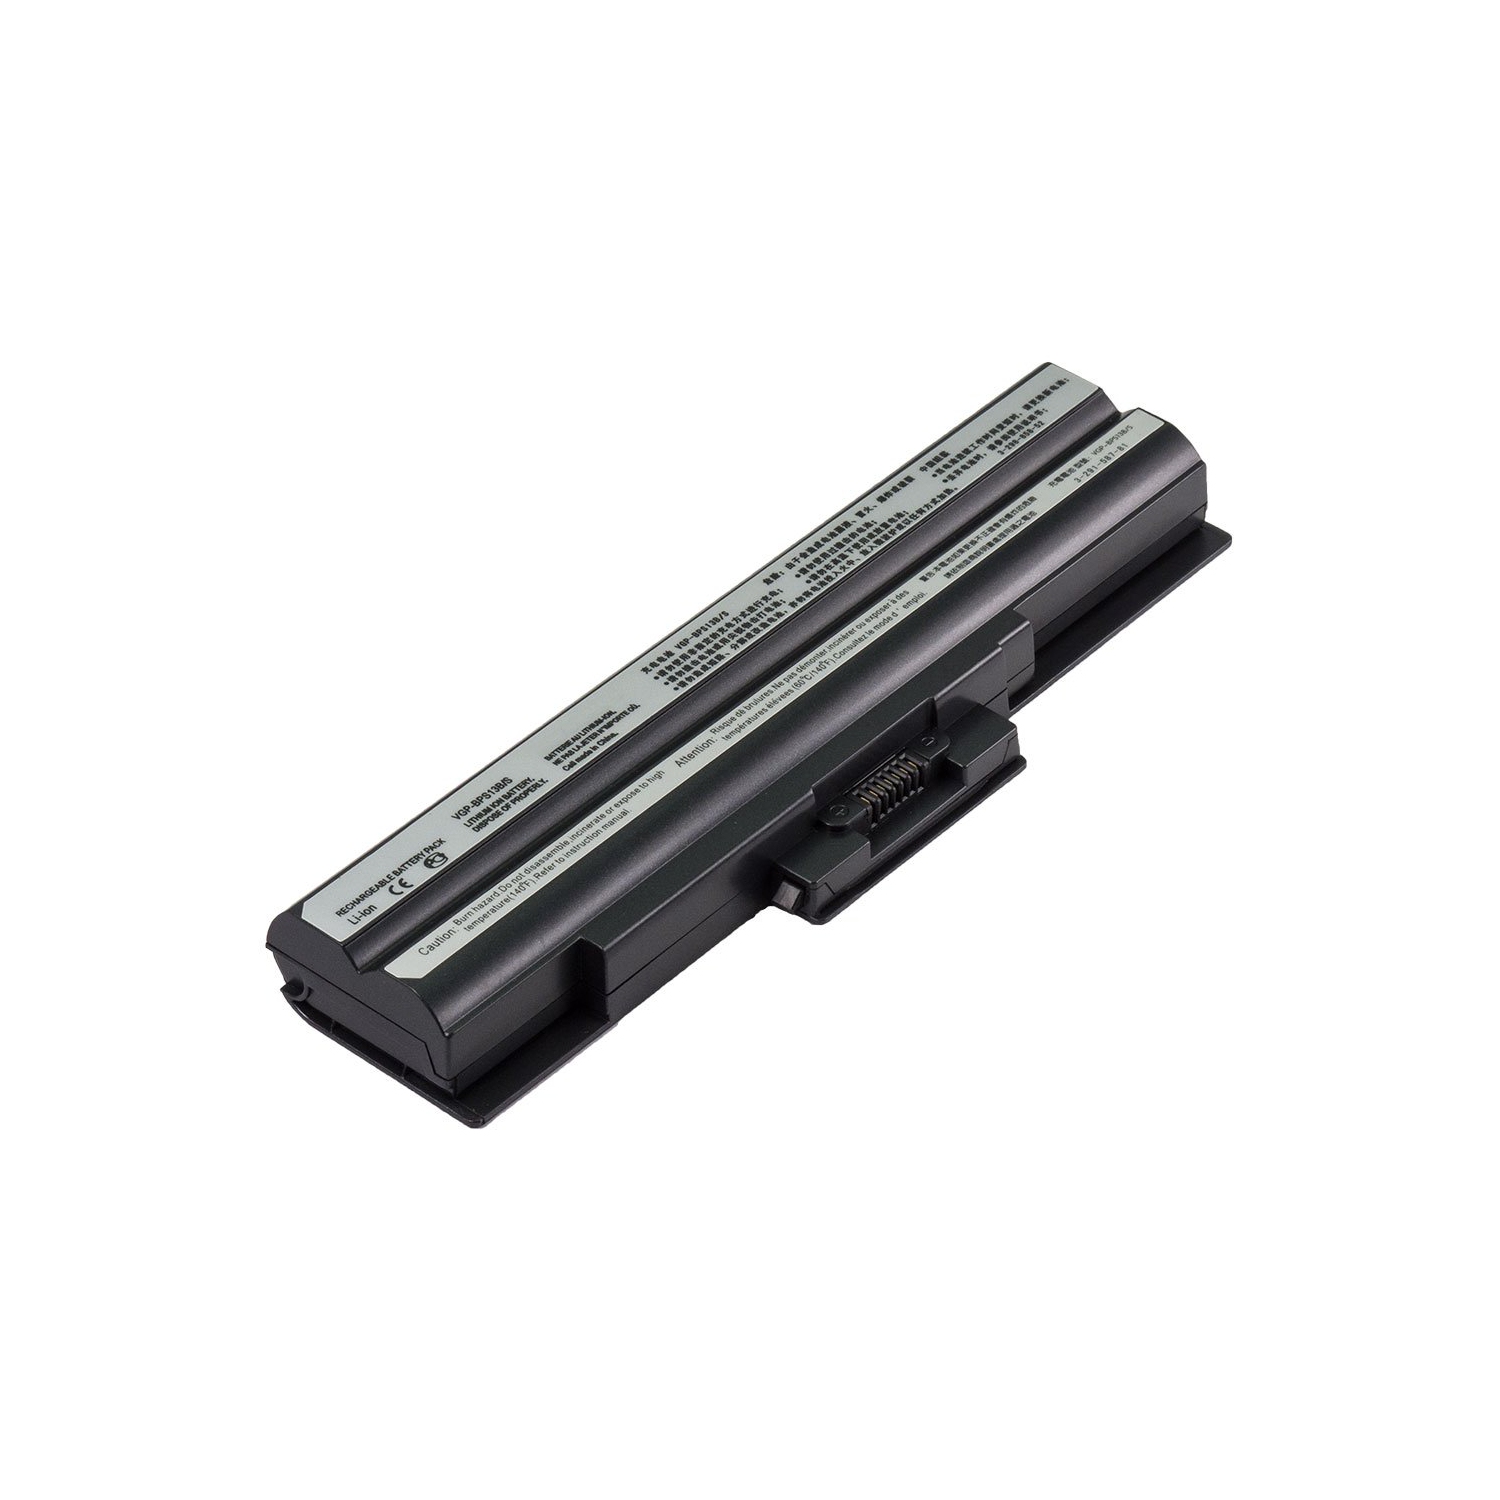 Laptop Battery Replacement for Sony VAIO VGN-SR130E/B, VGP-BPS13, VGP-BPS13/S, VGP-BPS13A/Q, VGP-BPS13B/B, VGP-BSP13/S